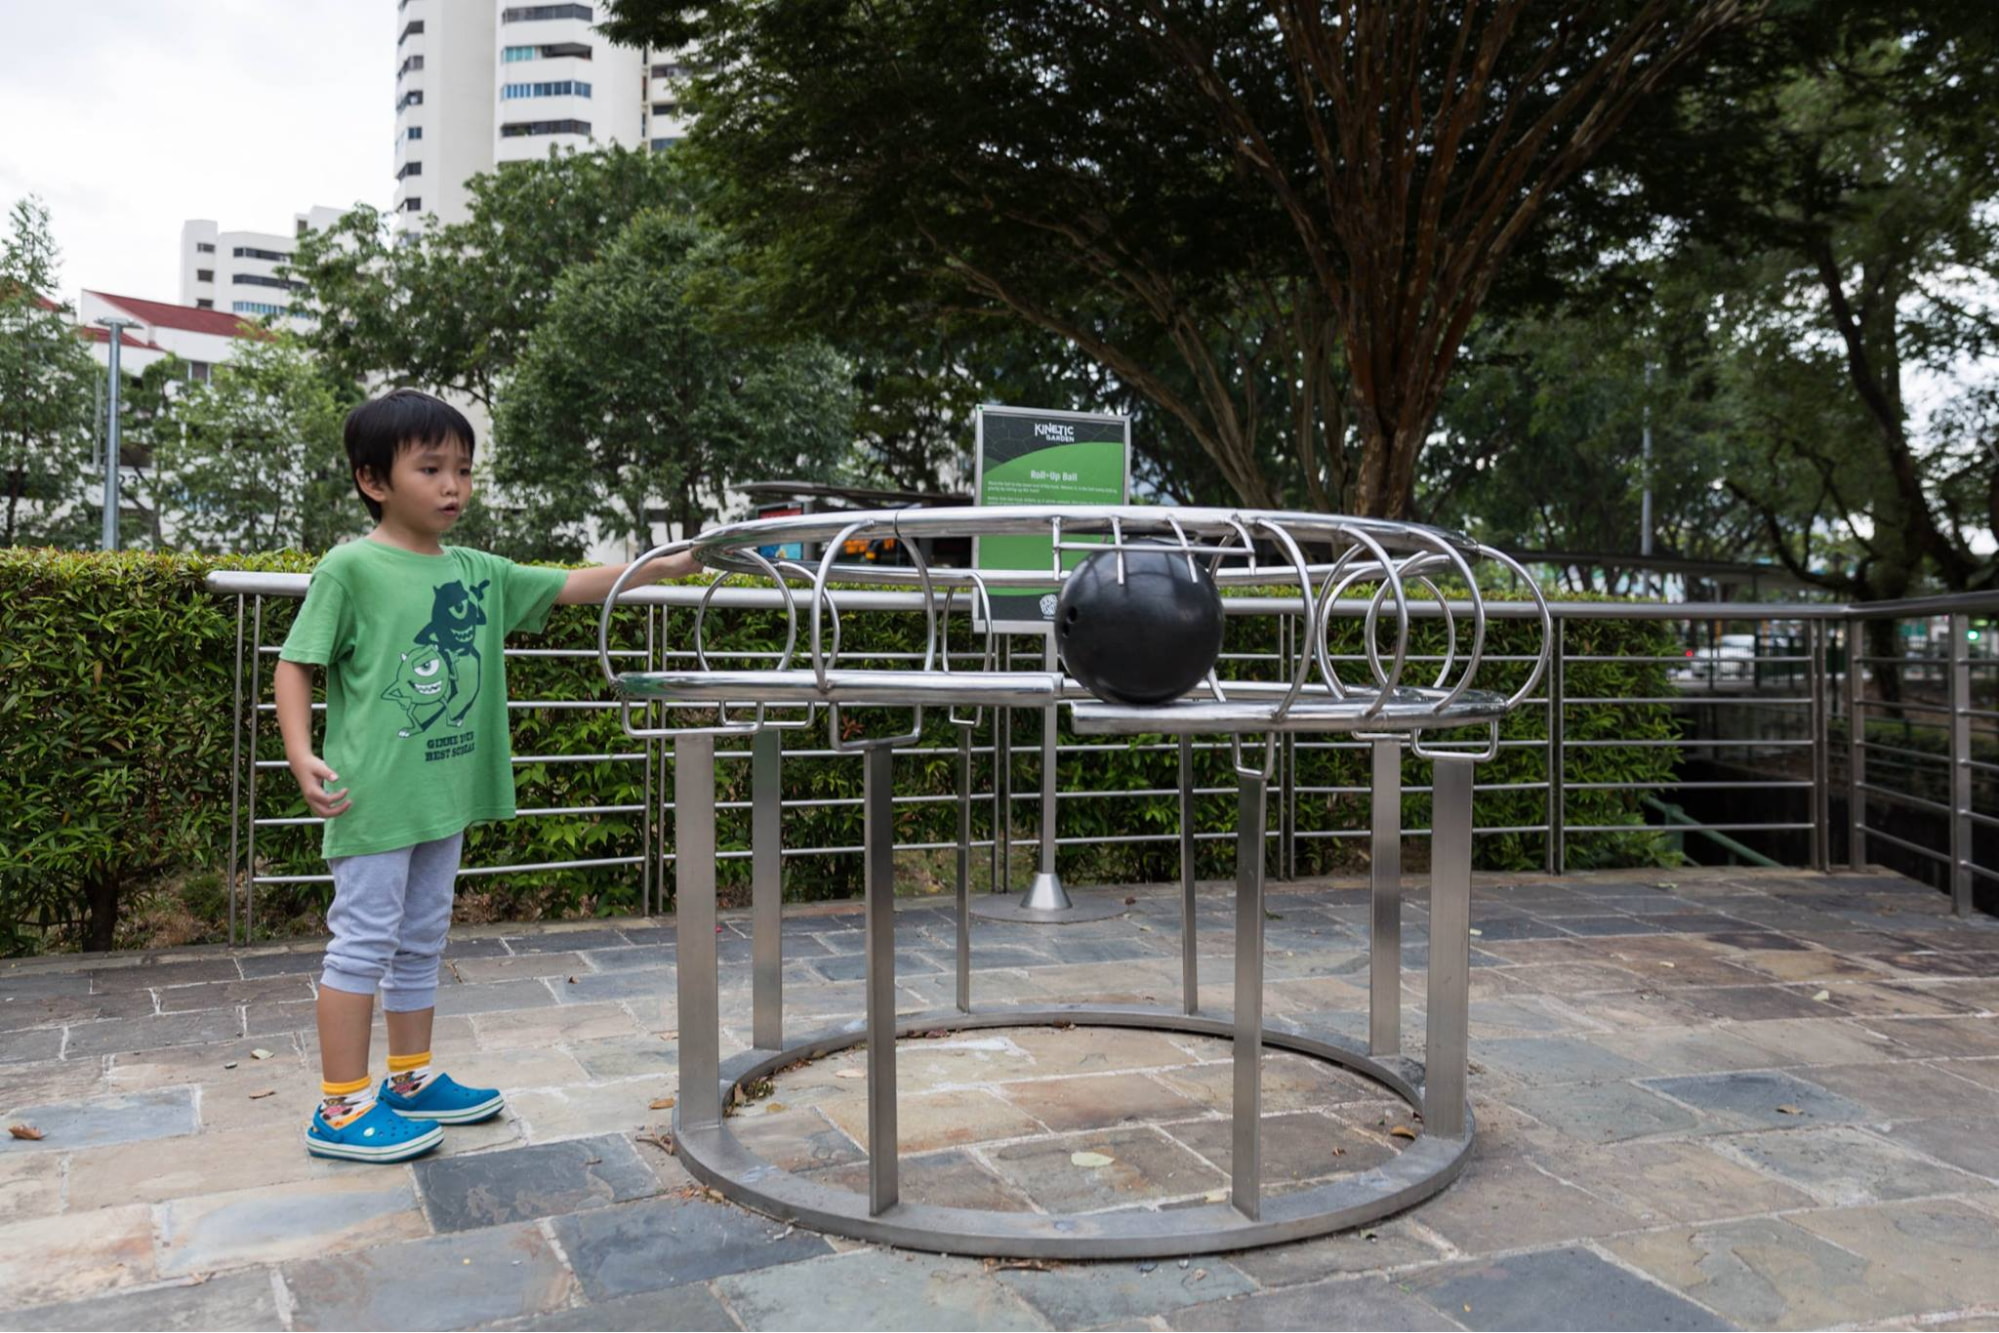 roll up ball outdoor physics exhibit at the singapore science centre kinetic garden with a child looking at the ball